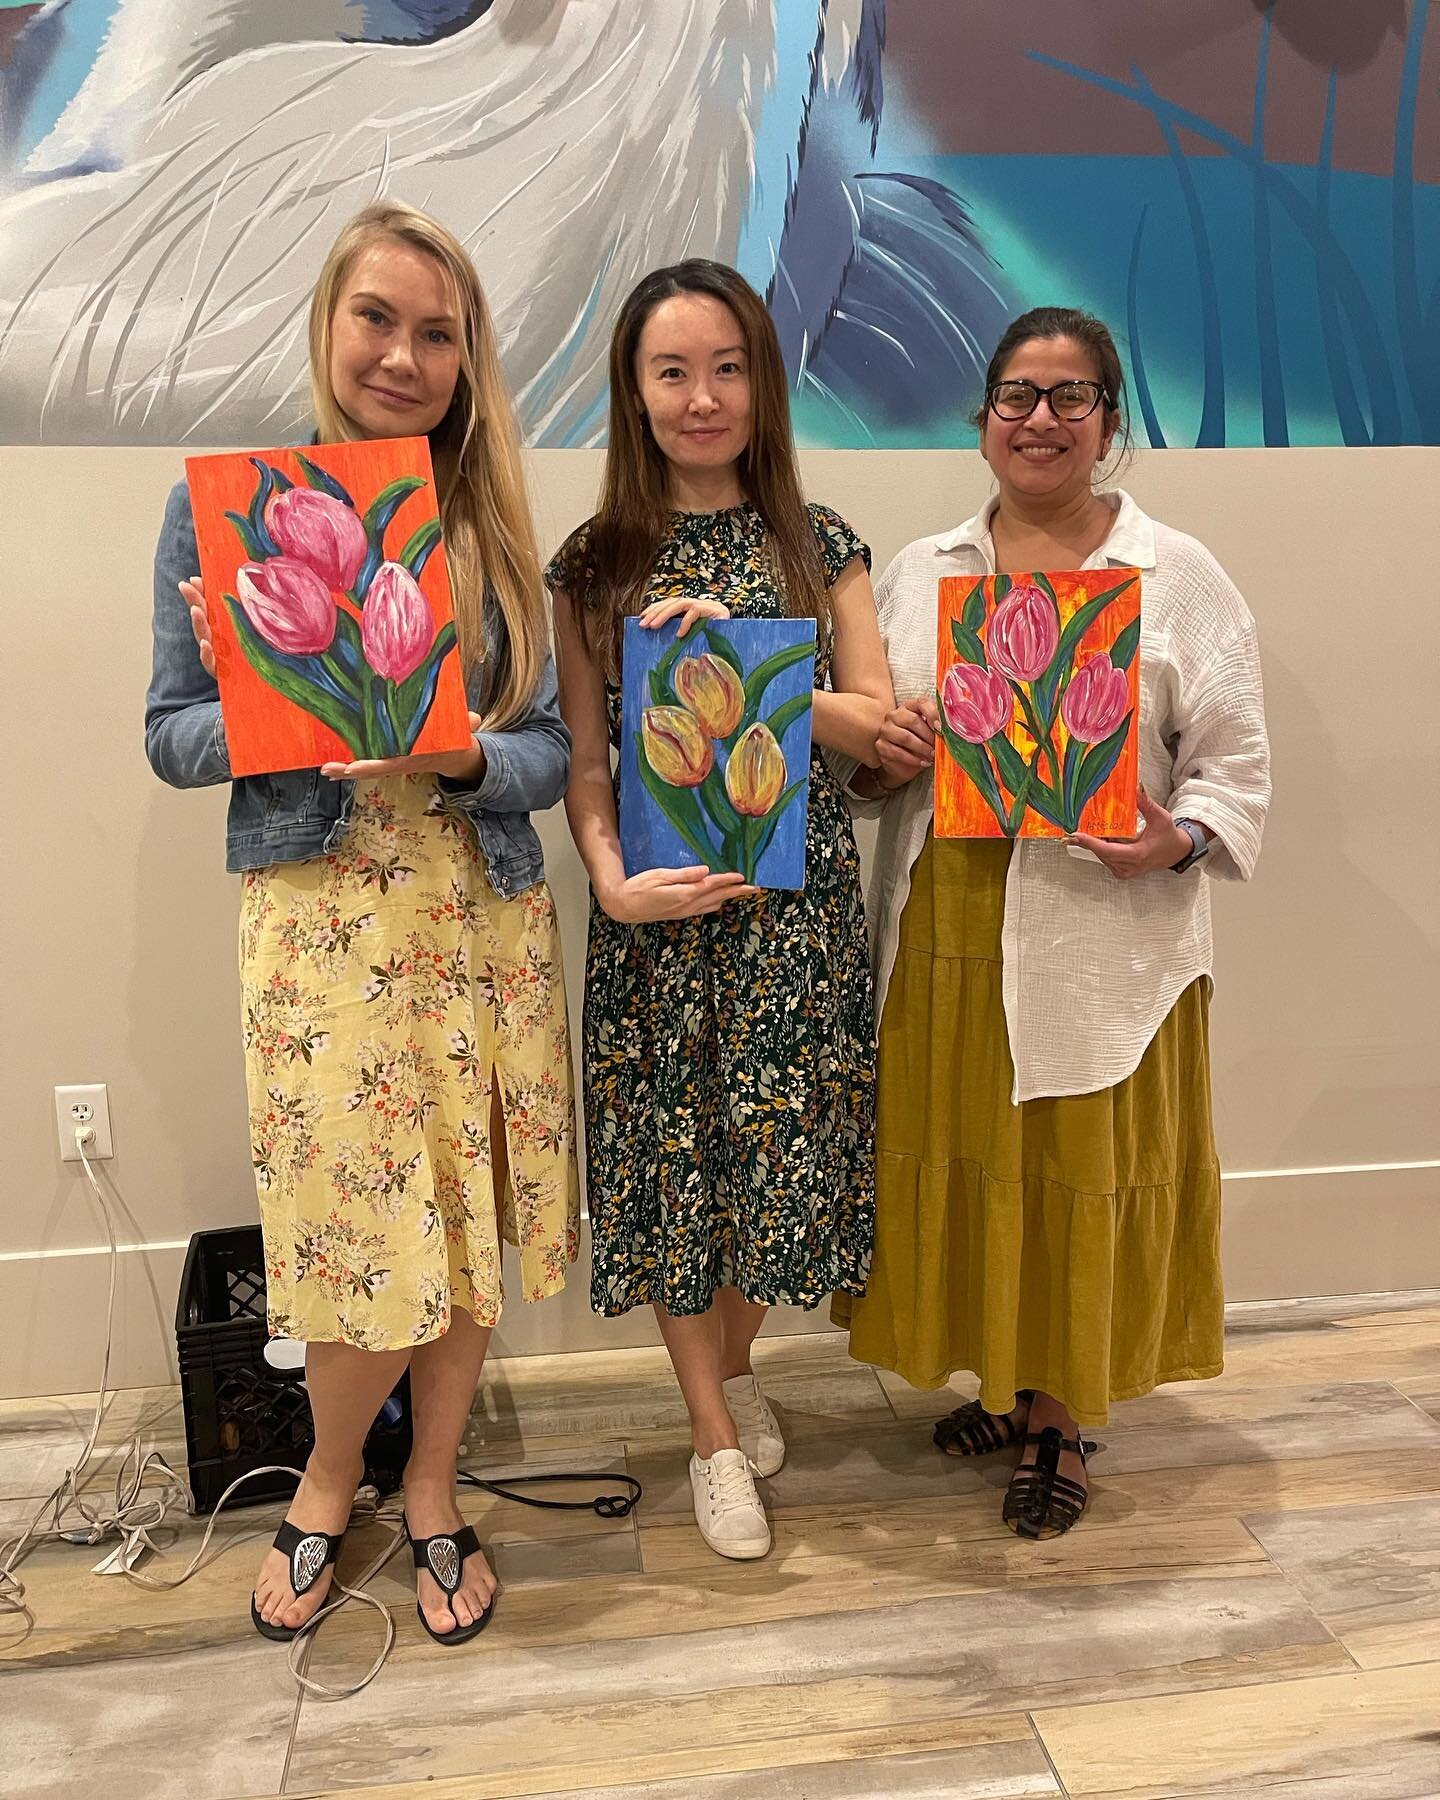 Colorful flowers, superb concentration, and students of all ages at resident artist  @dream.weavin&rsquo;s spring art classes at @parcwesleychapel in Tampa! We love to see our community members having fun and relaxing through art 🌸🎨🌷
.
.
.
#americ